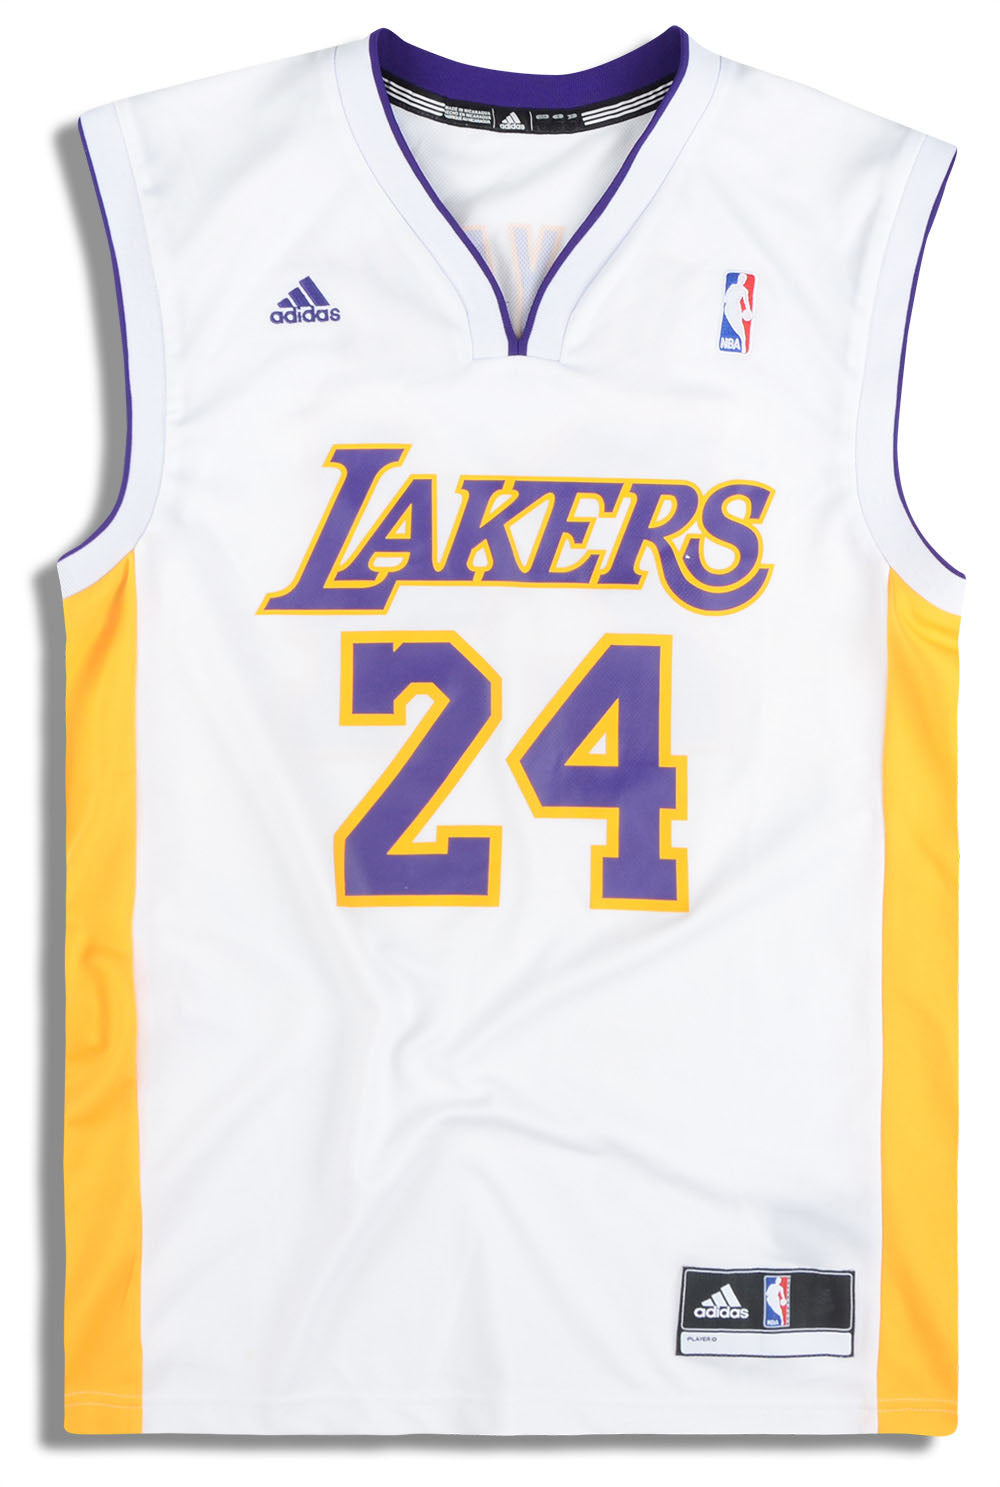 2010-14 LA LAKERS BRYANT #24 ADIDAS JERSEY (HOME) M - Classic American  Sports